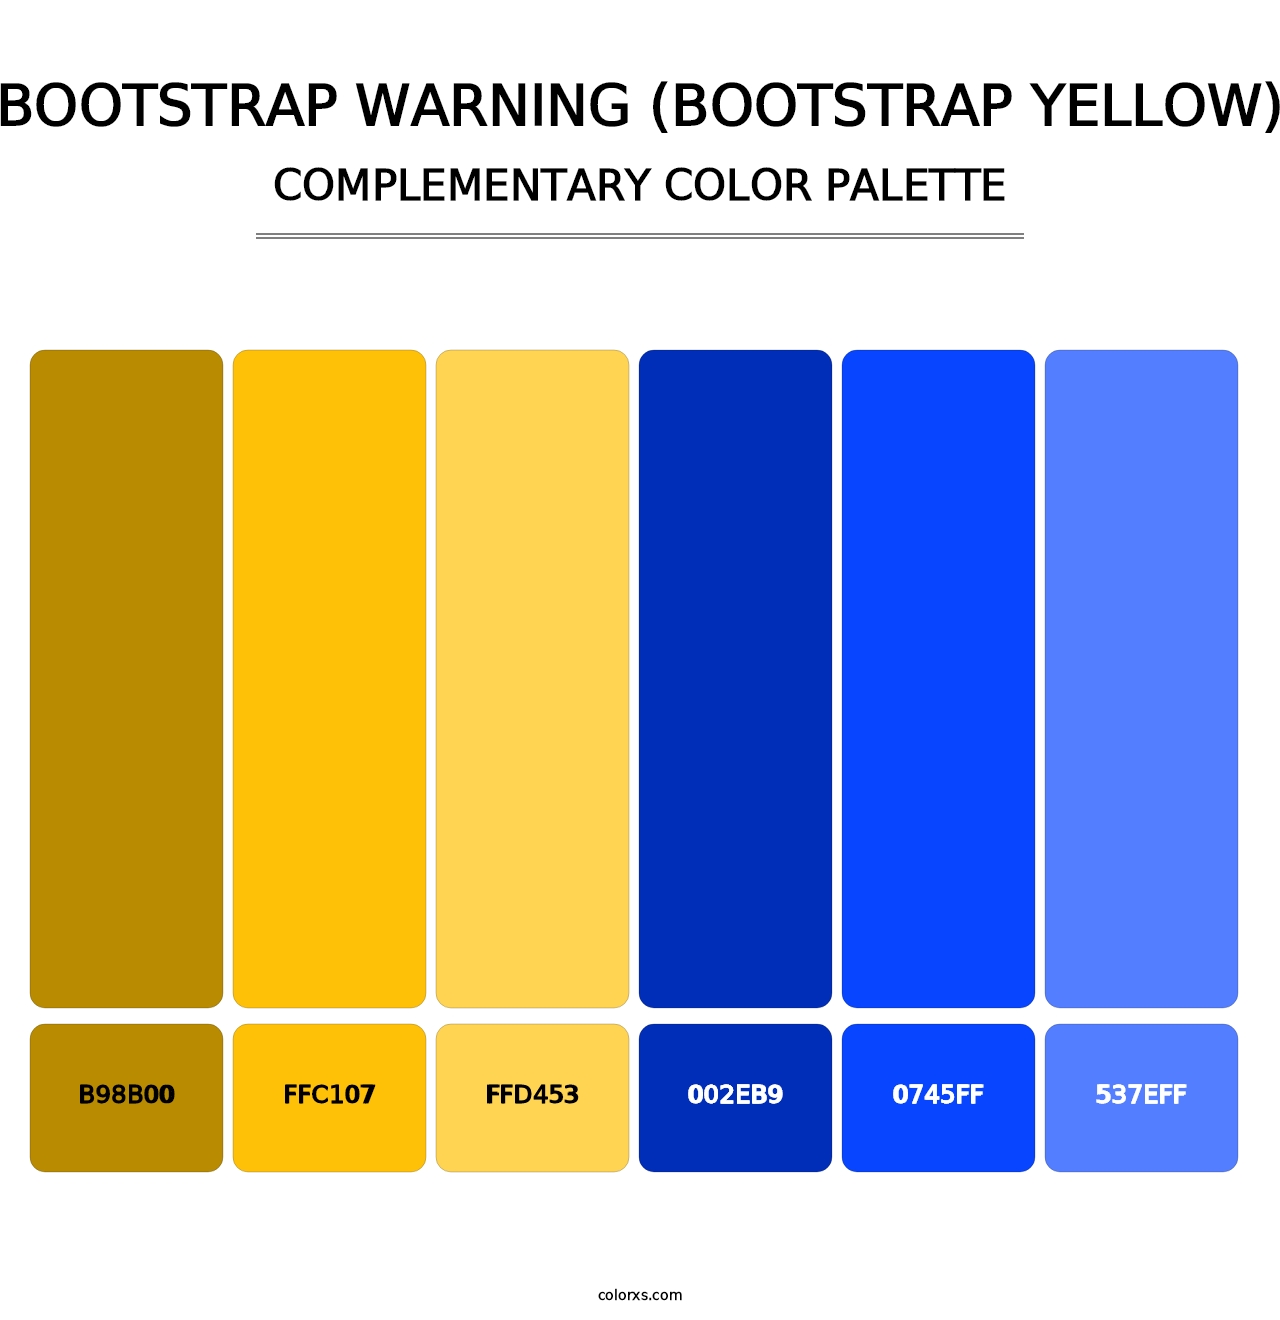 Bootstrap Warning (Bootstrap Yellow) - Complementary Color Palette